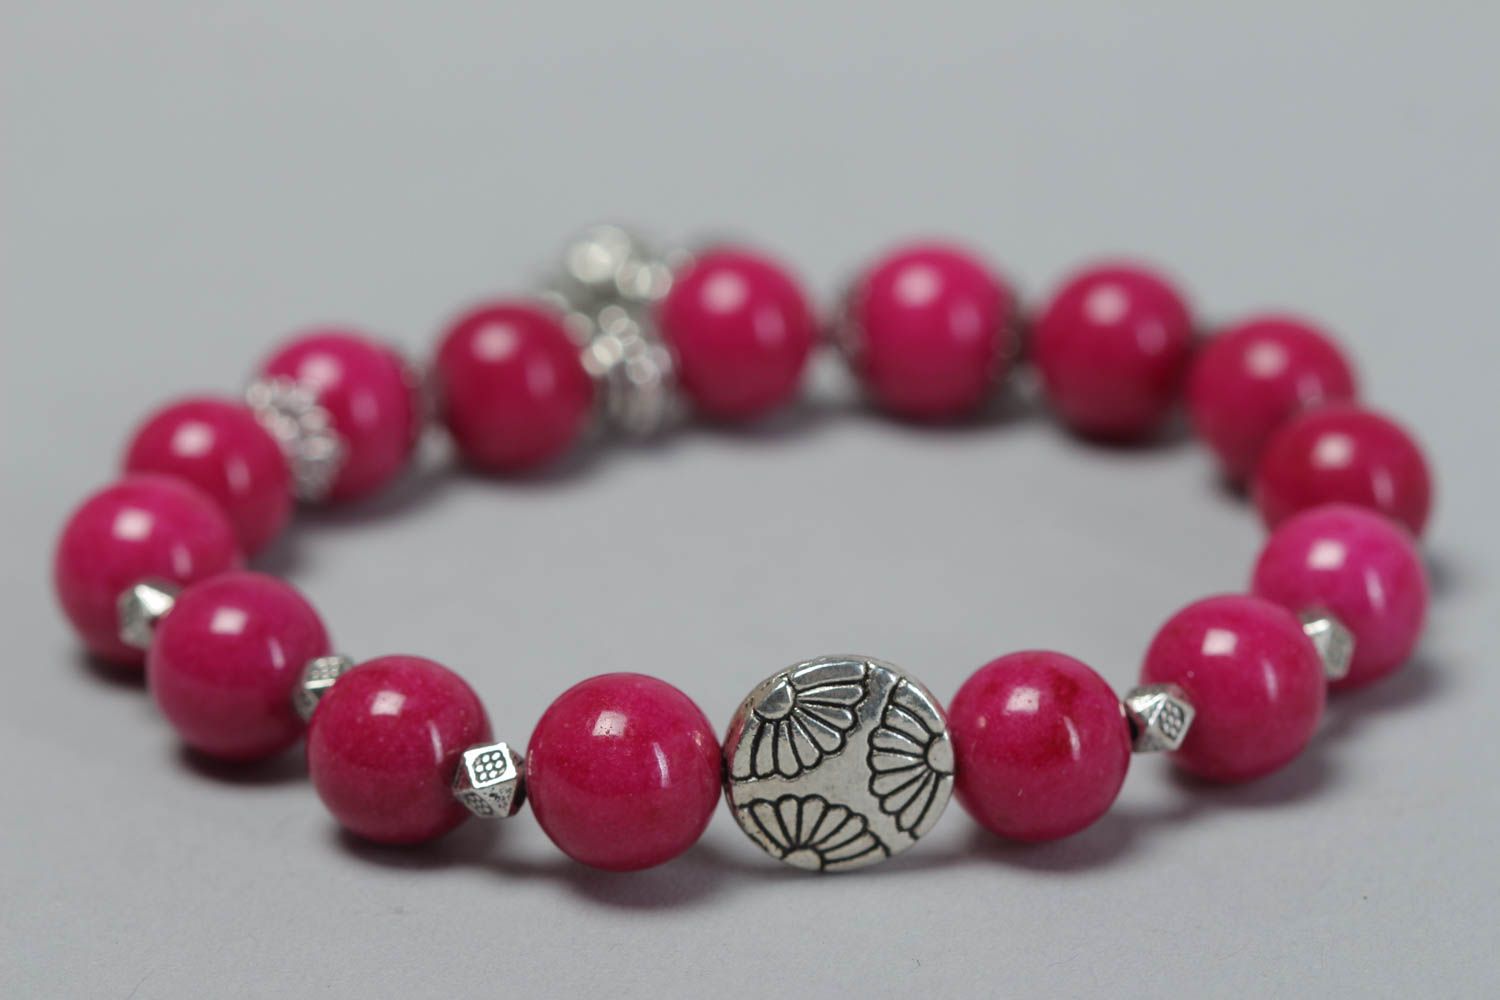 Handmade bracelet with charms stylish bright accessory cute pink jewelry photo 4